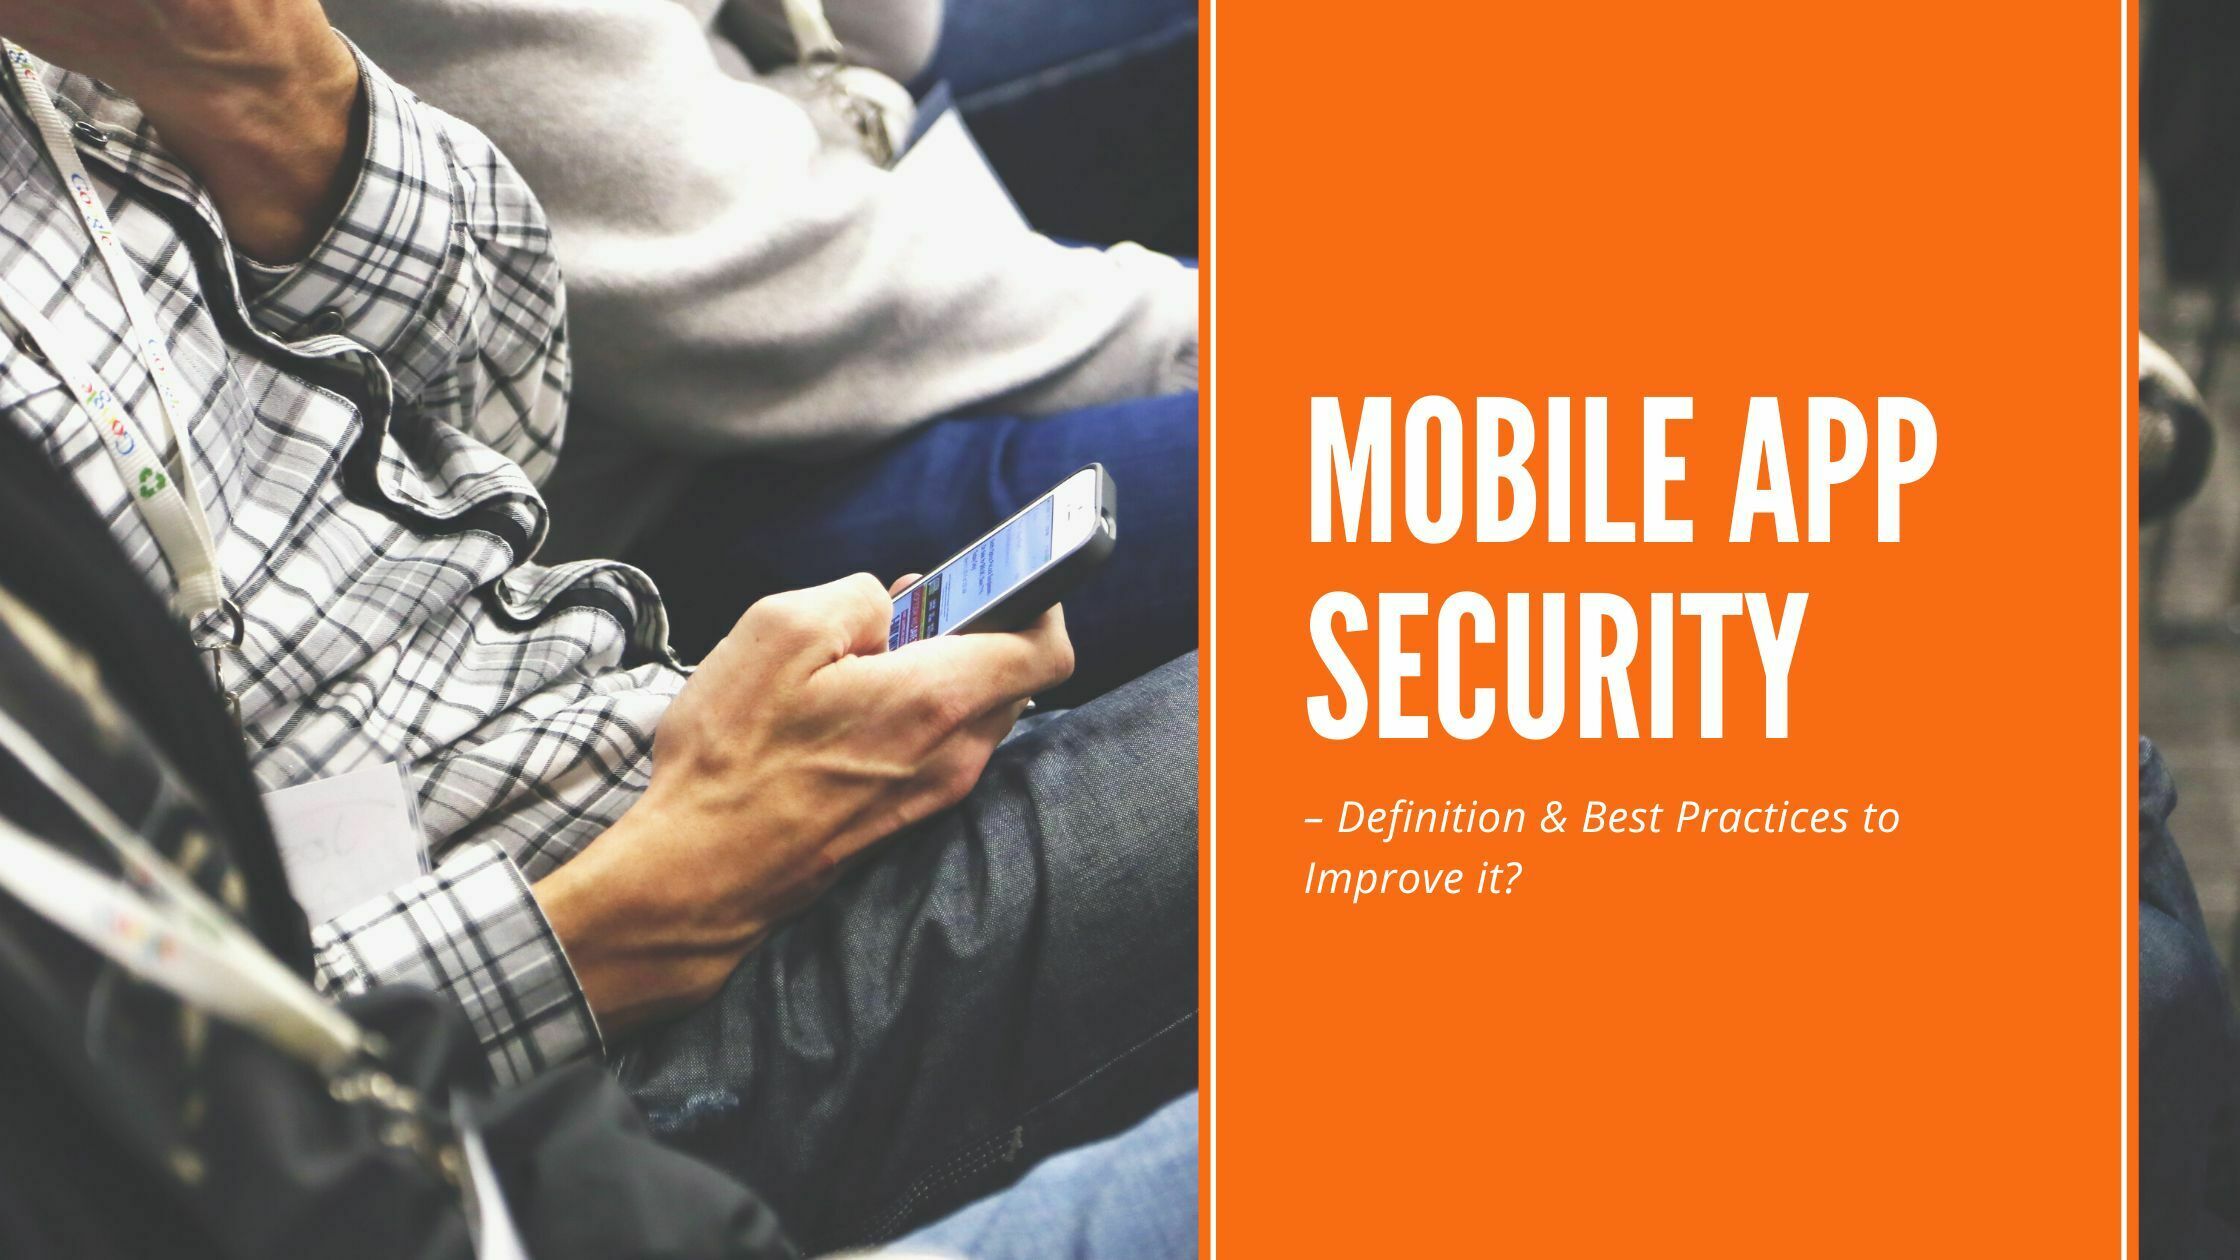 Mobile App Security – Definition & Best Practices to Improve it?